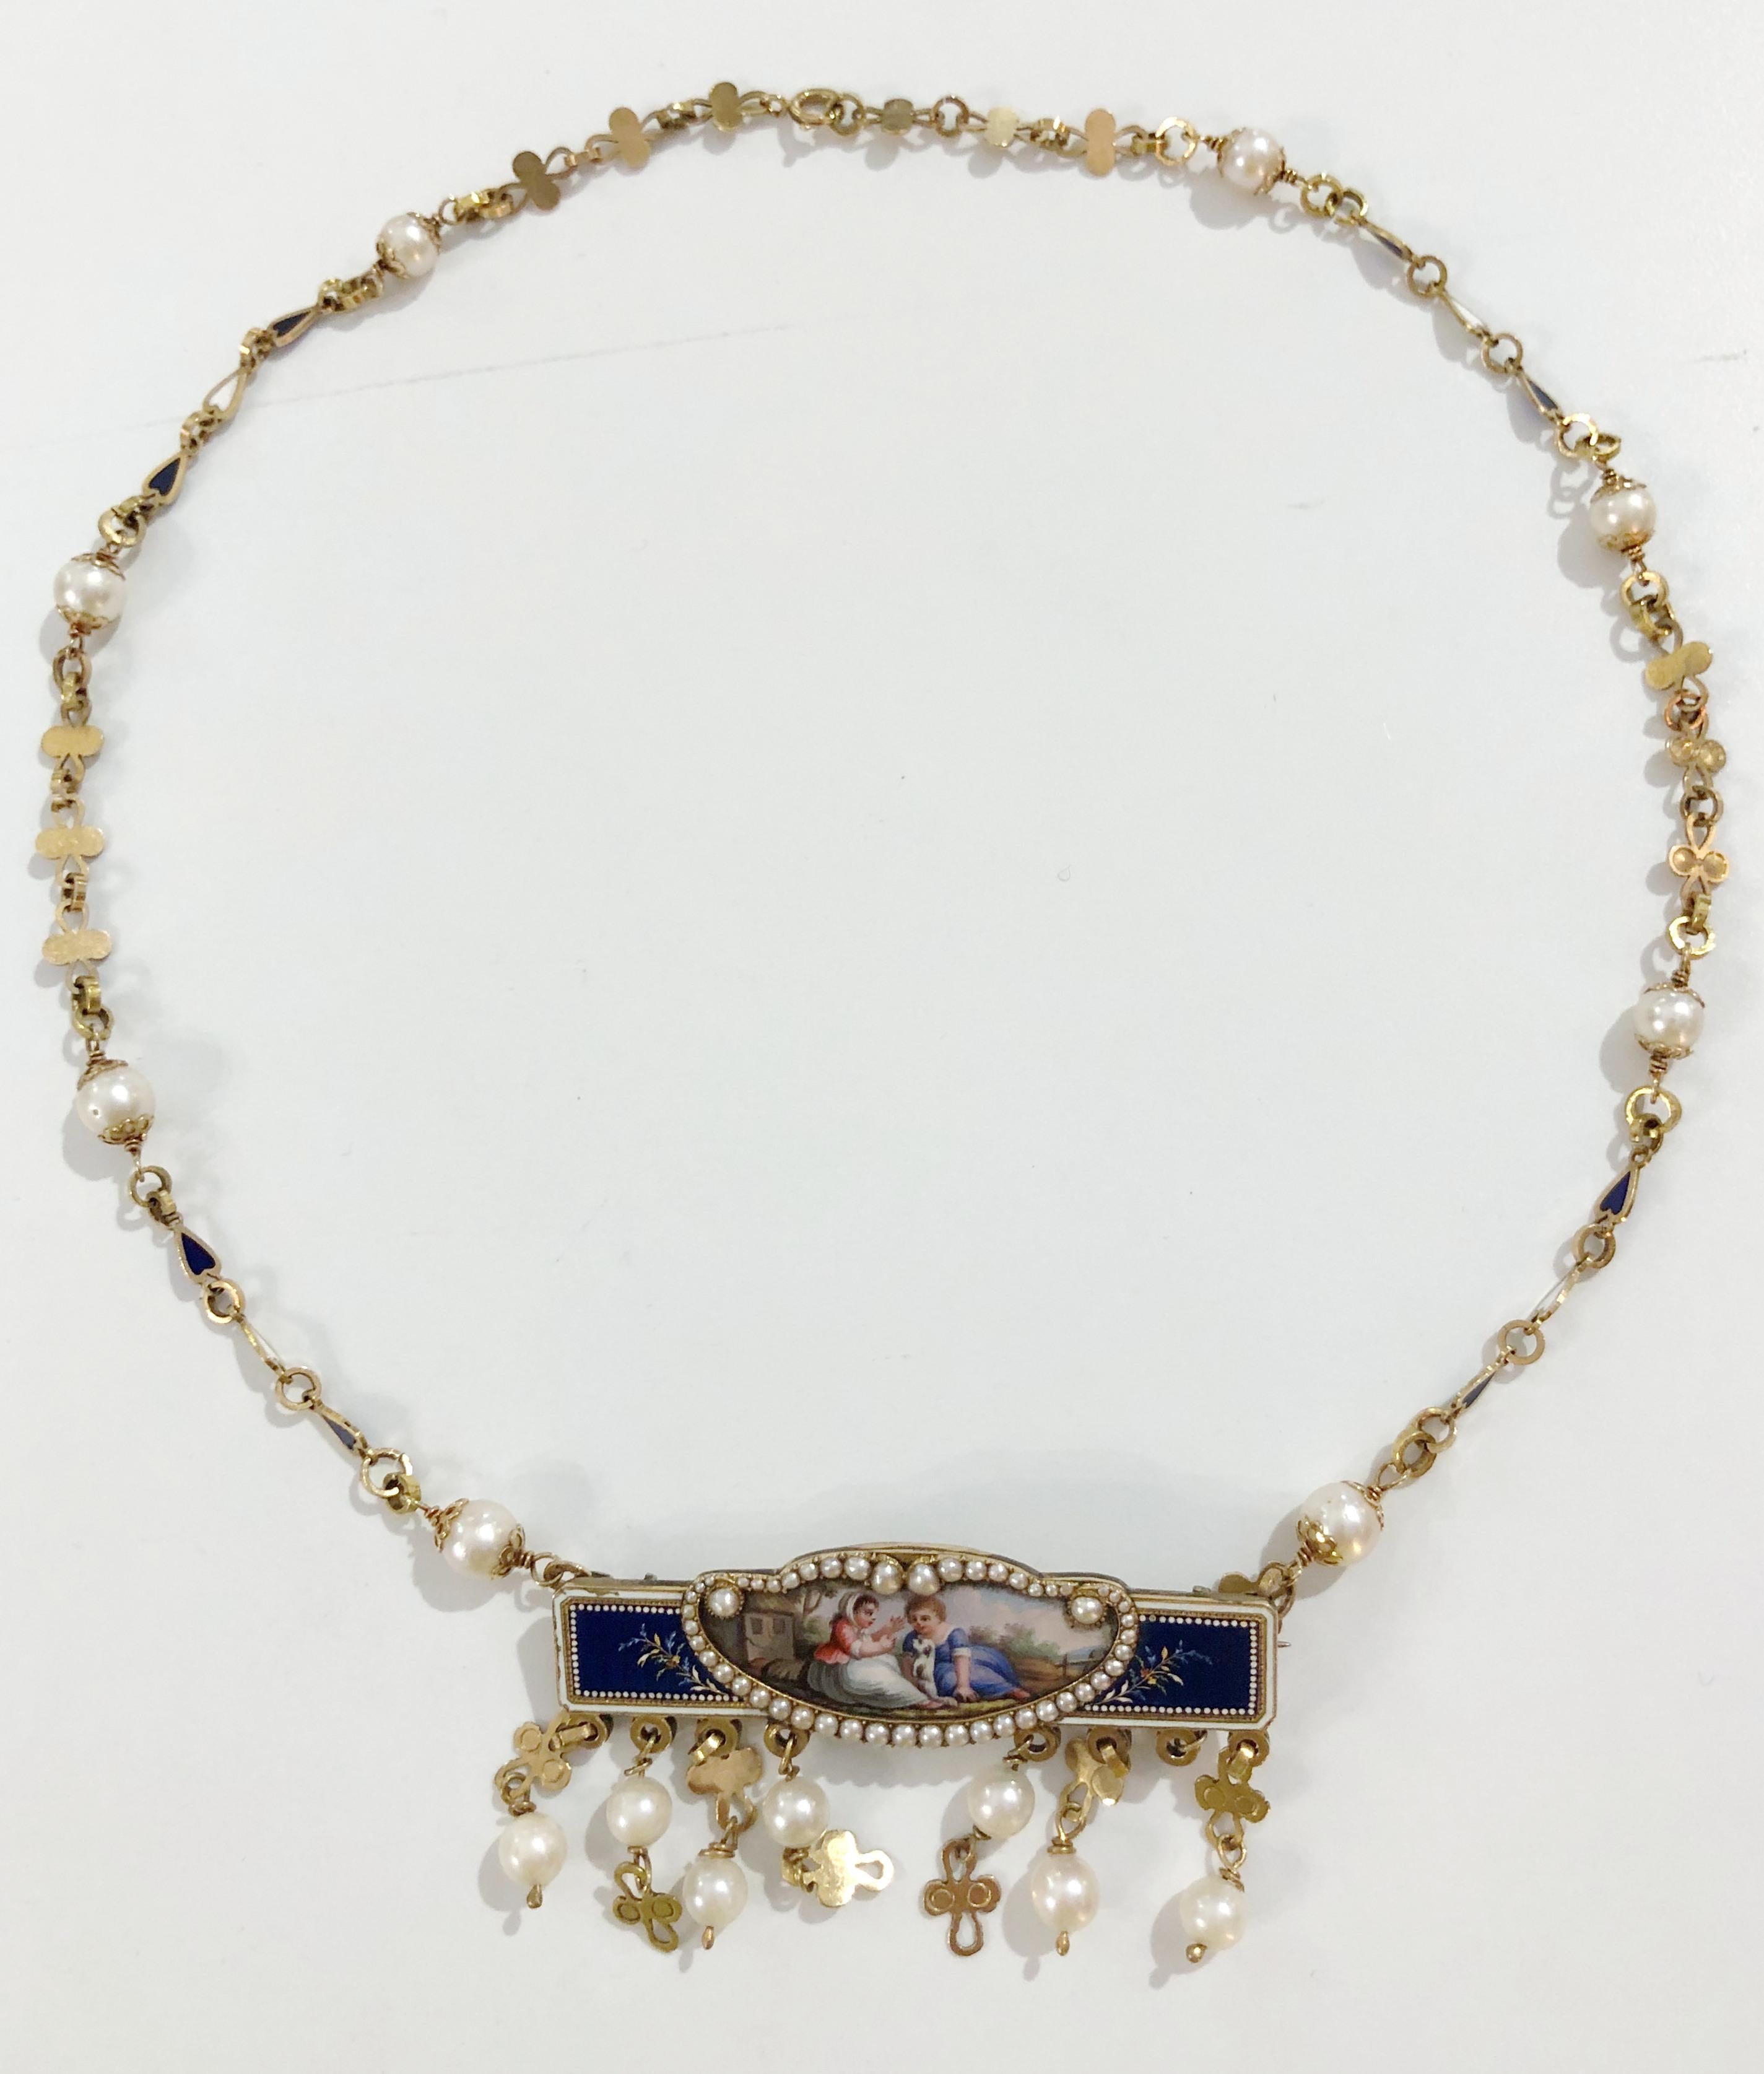 Vintage 18 karat gold necklace with pearls and enamel miniature which also becomes a brooch, Italy 1890-1910
Length 50 cm